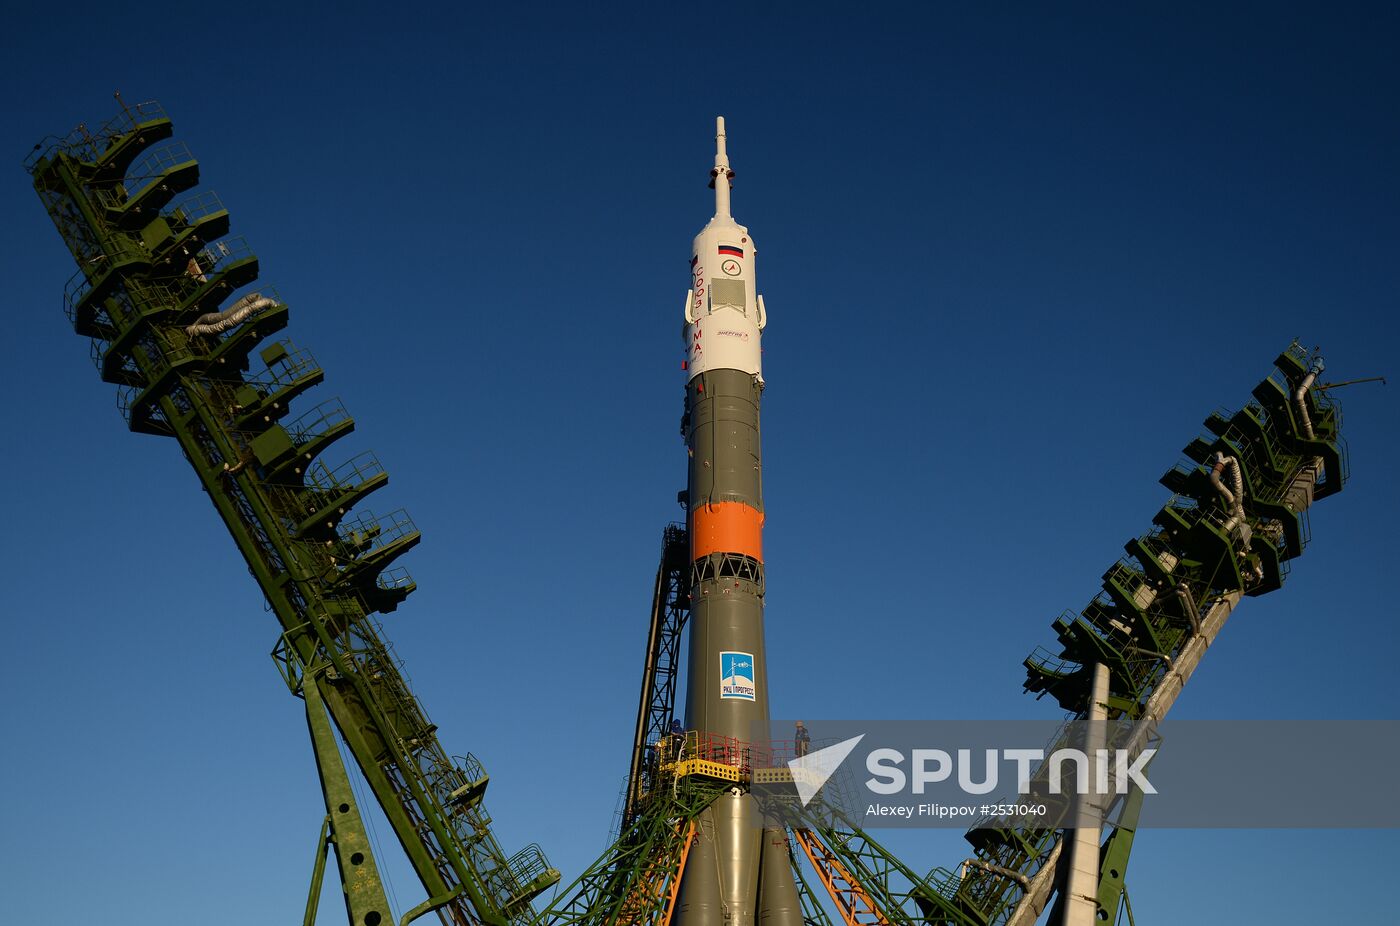 Soyuz ТМА-15М rocket carried to launch site